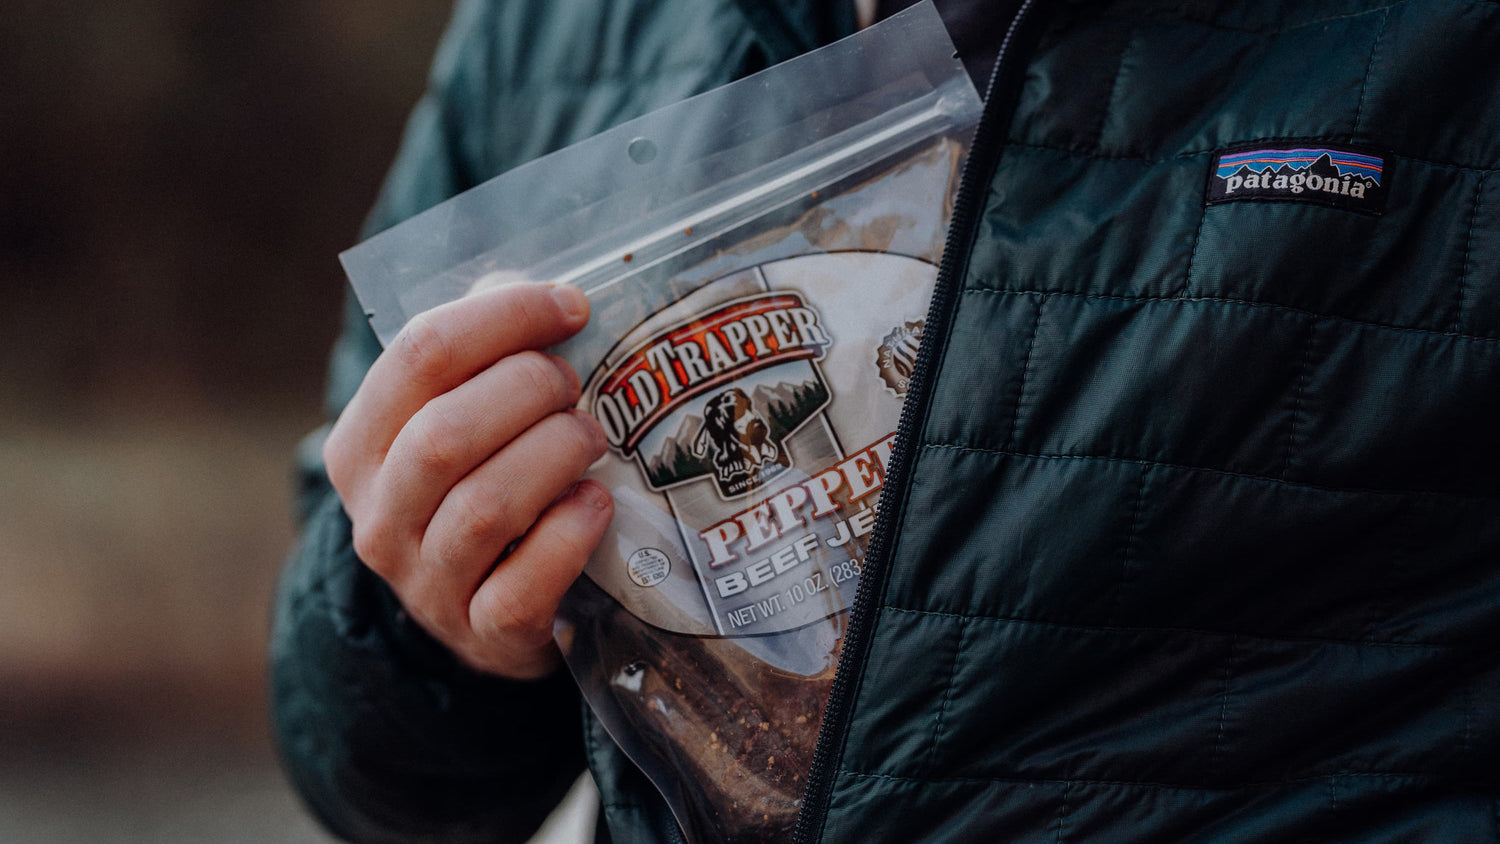 A packet of Old Trapper Beef Jerky fits snugly in a person's jacket